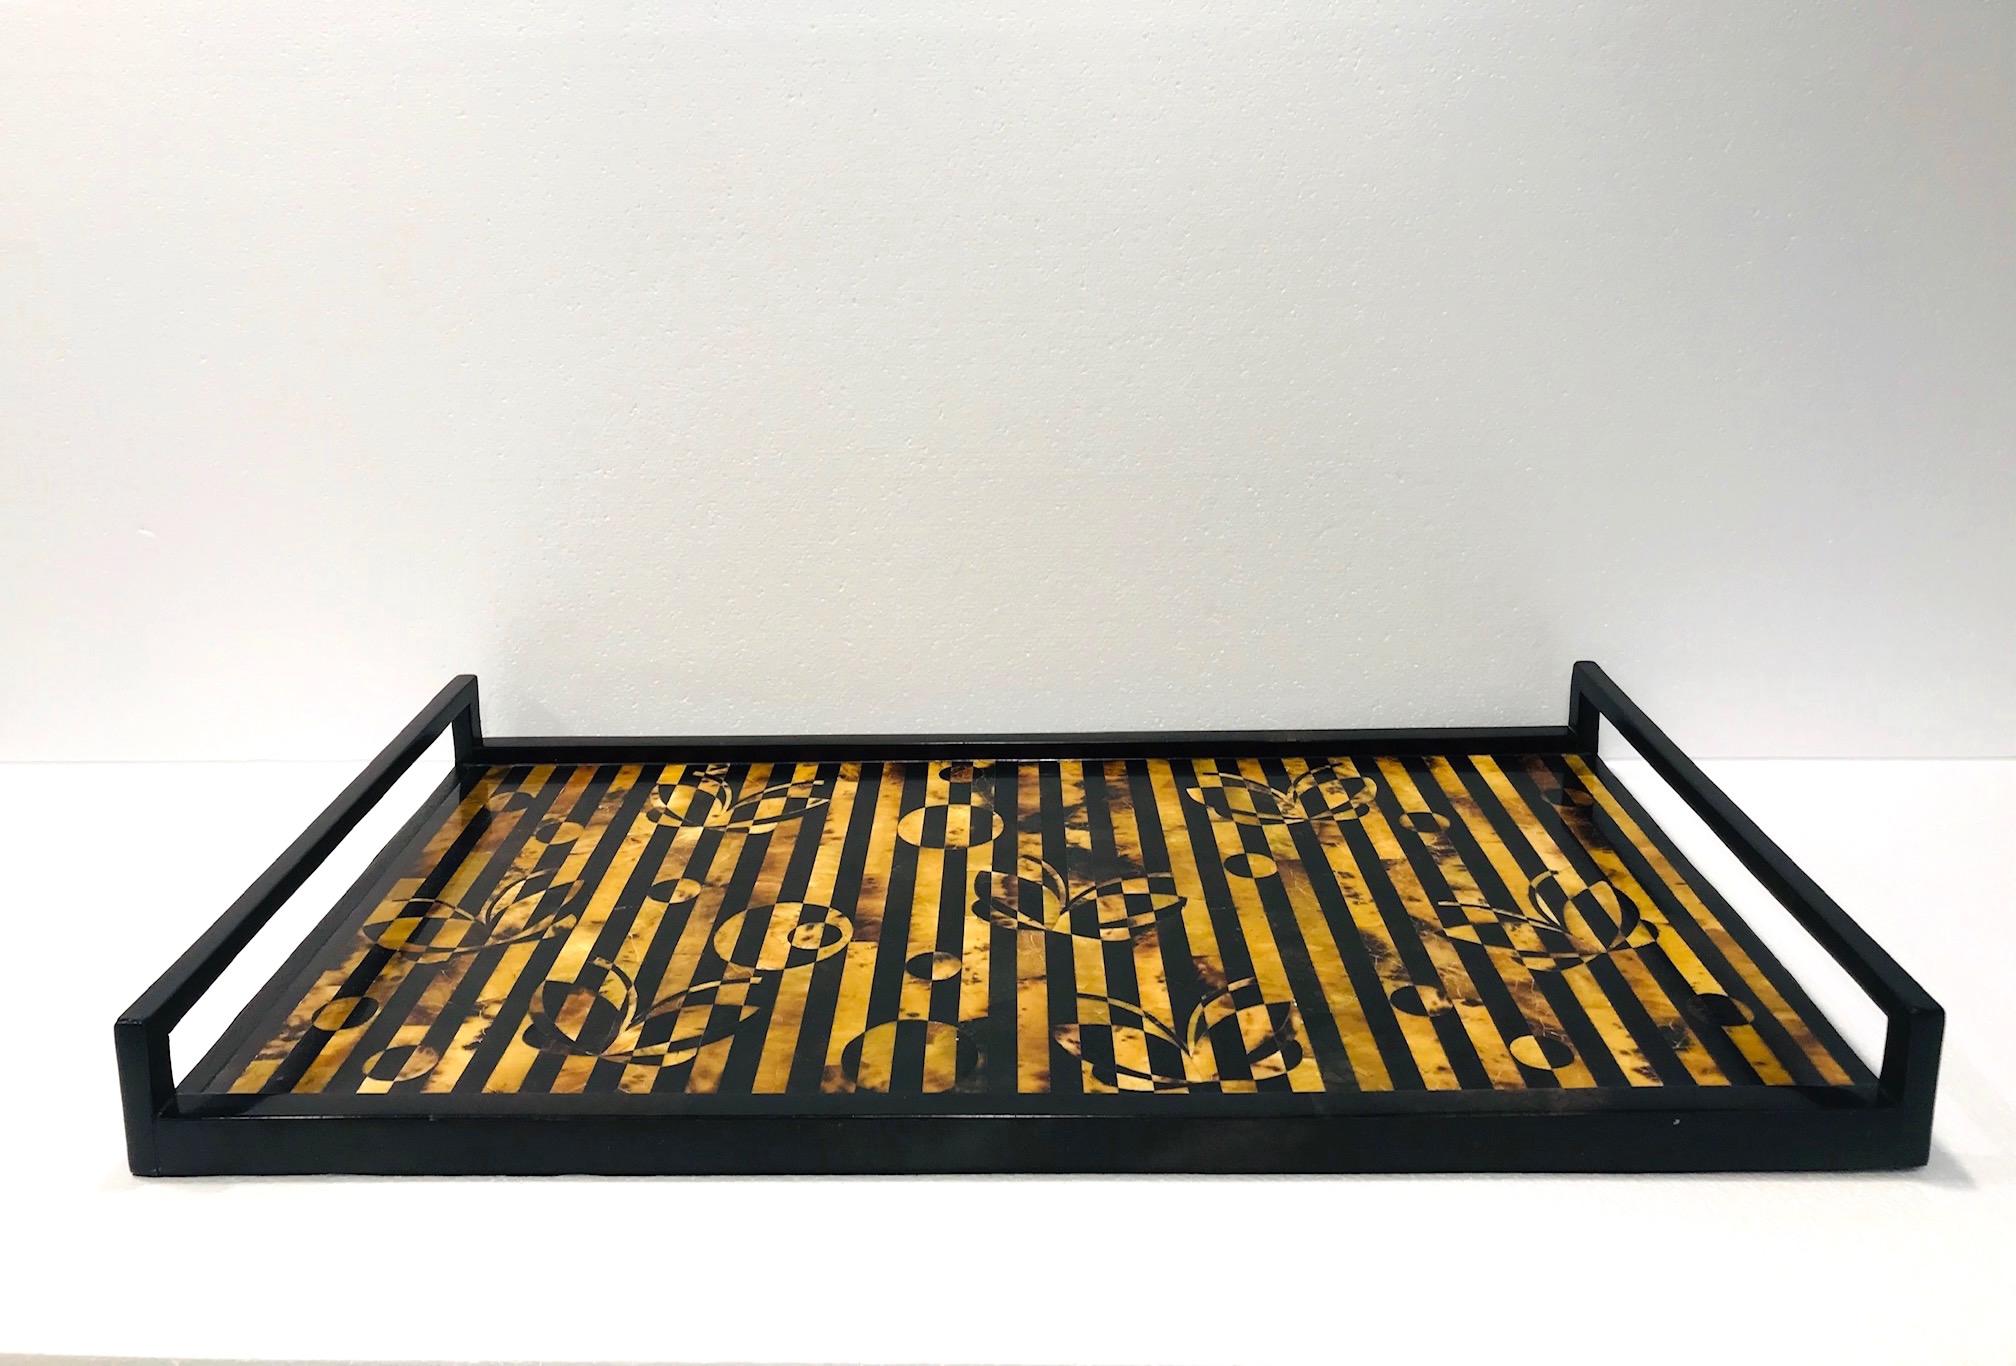 Organic modern decorative serving tray by R & Y Augousti. All handcrafted in fine exotic materials featuring lacquered and hand-dyed pen shell over a wood frame. Rectangular tray comprised of shell inlays in a series of stripes in tones of black,